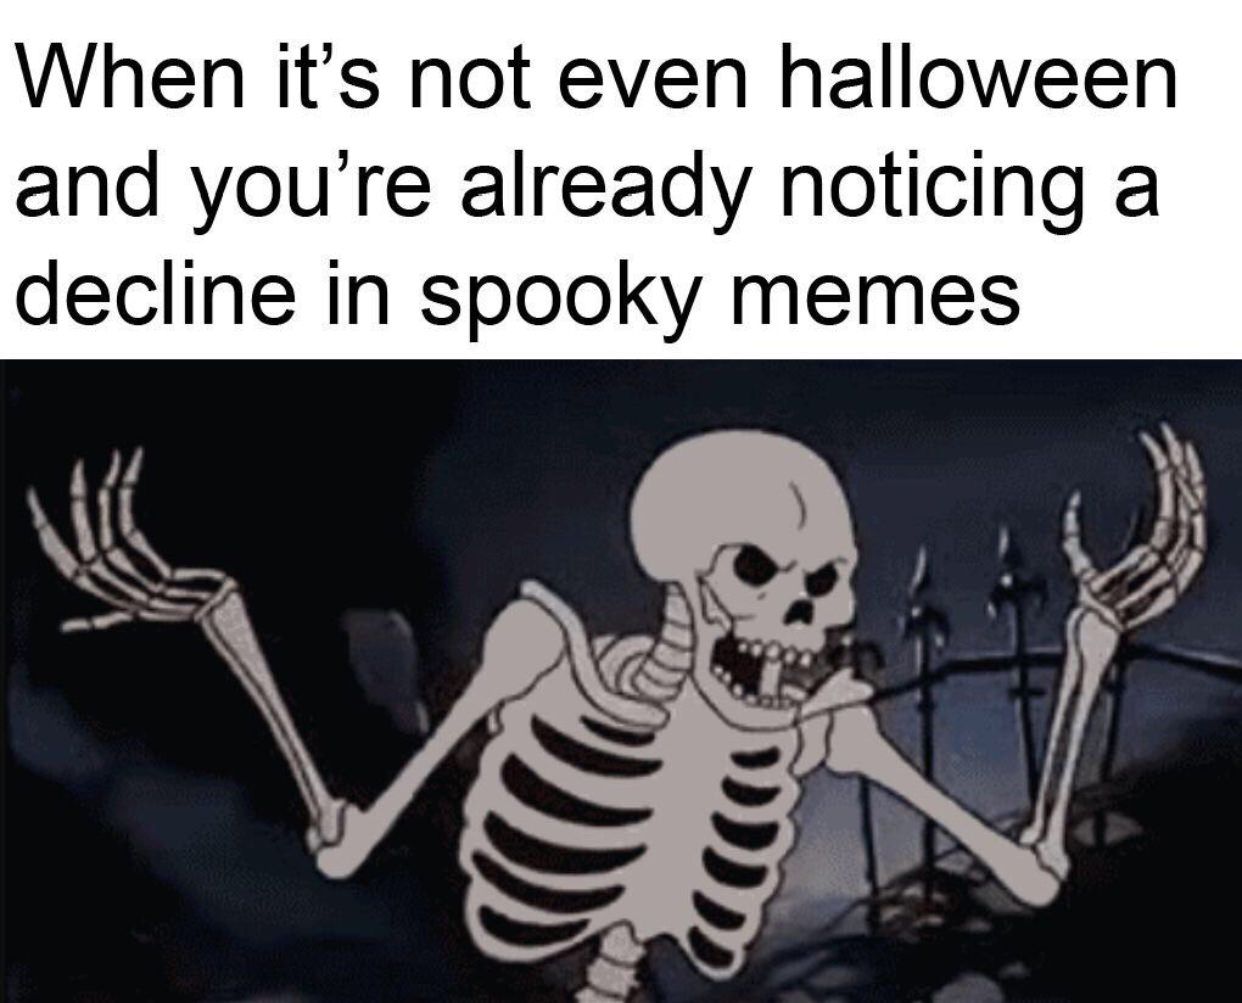 Spoopy Scary Skeletons